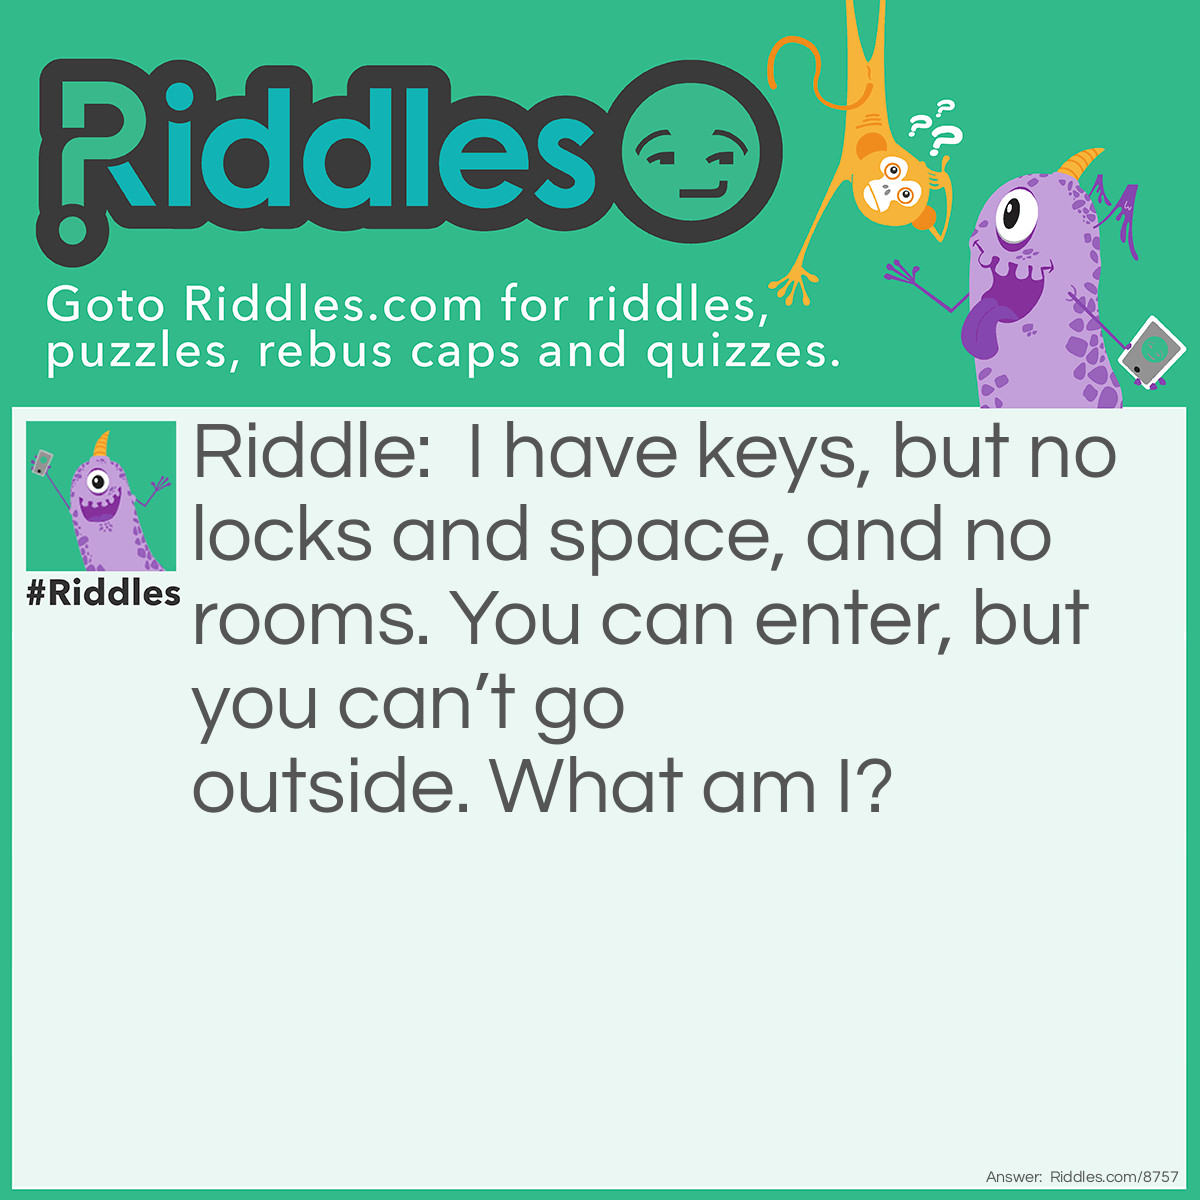 Riddle: I have keys, but no locks and space, and no rooms. You can enter, but you can't go outside. What am I? Answer: A keyboard